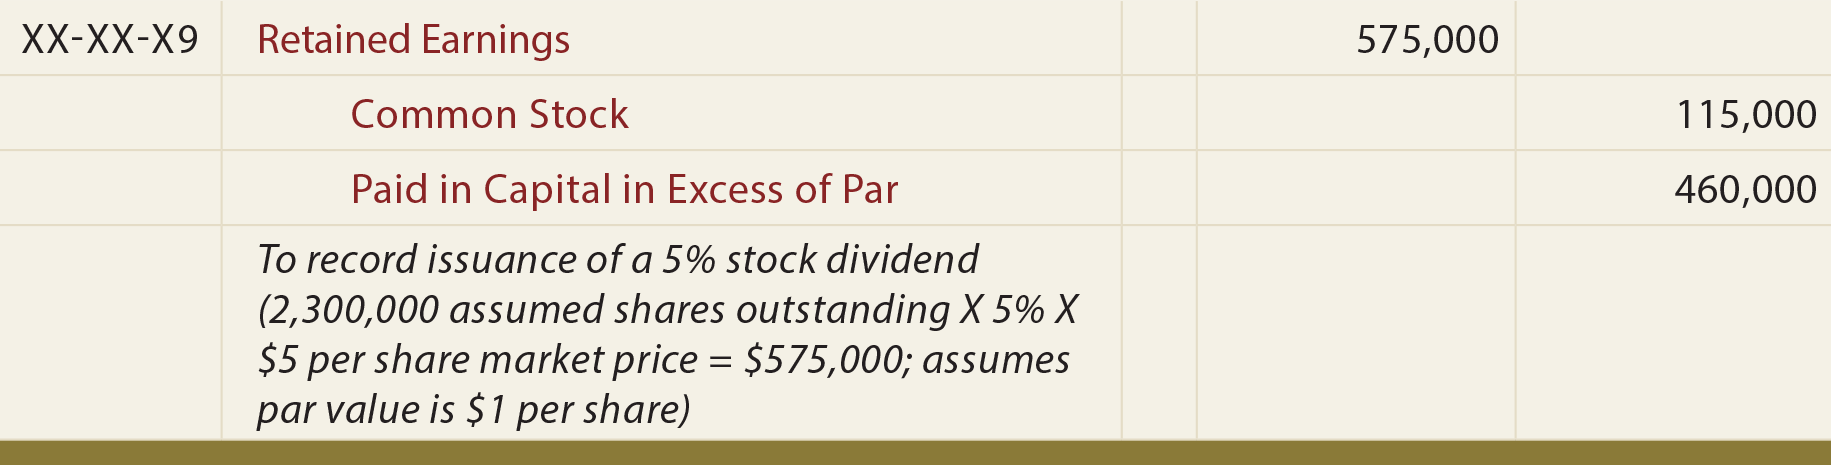 Small Stock Dividend General Journal Entry - To record issuance of small stock dividend